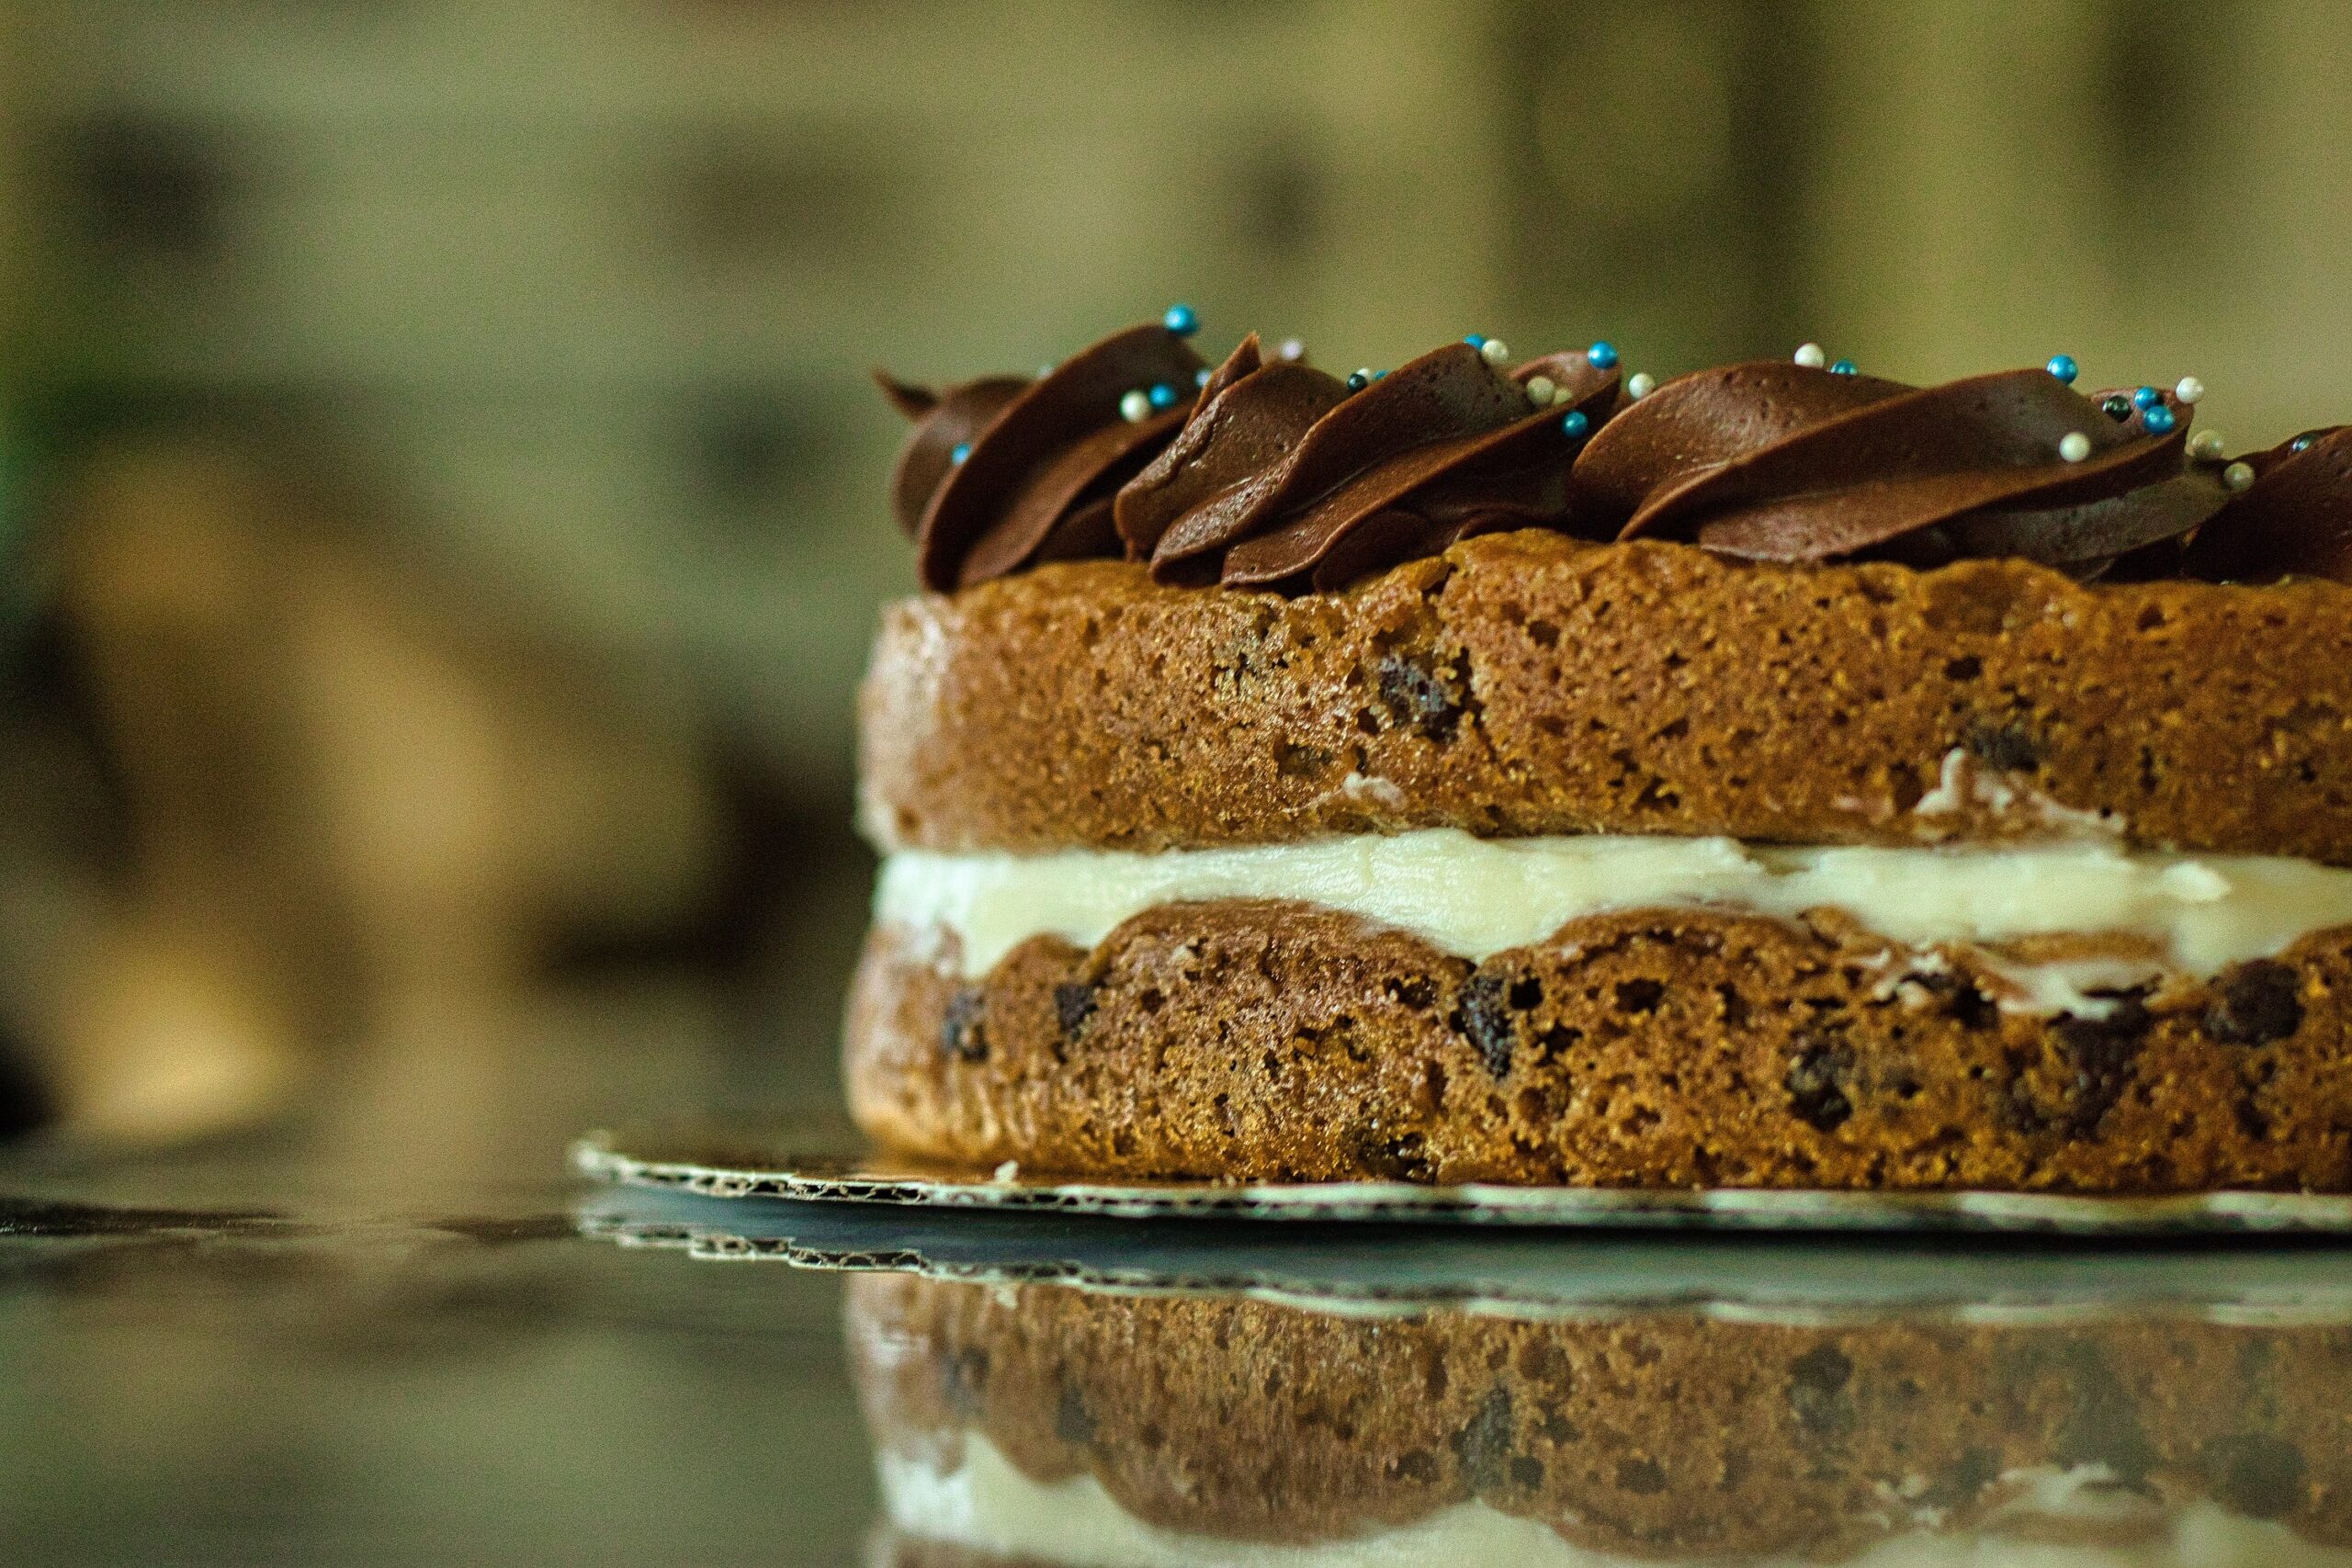 Scrumptious Cookie Cakes Near You – Order Now!